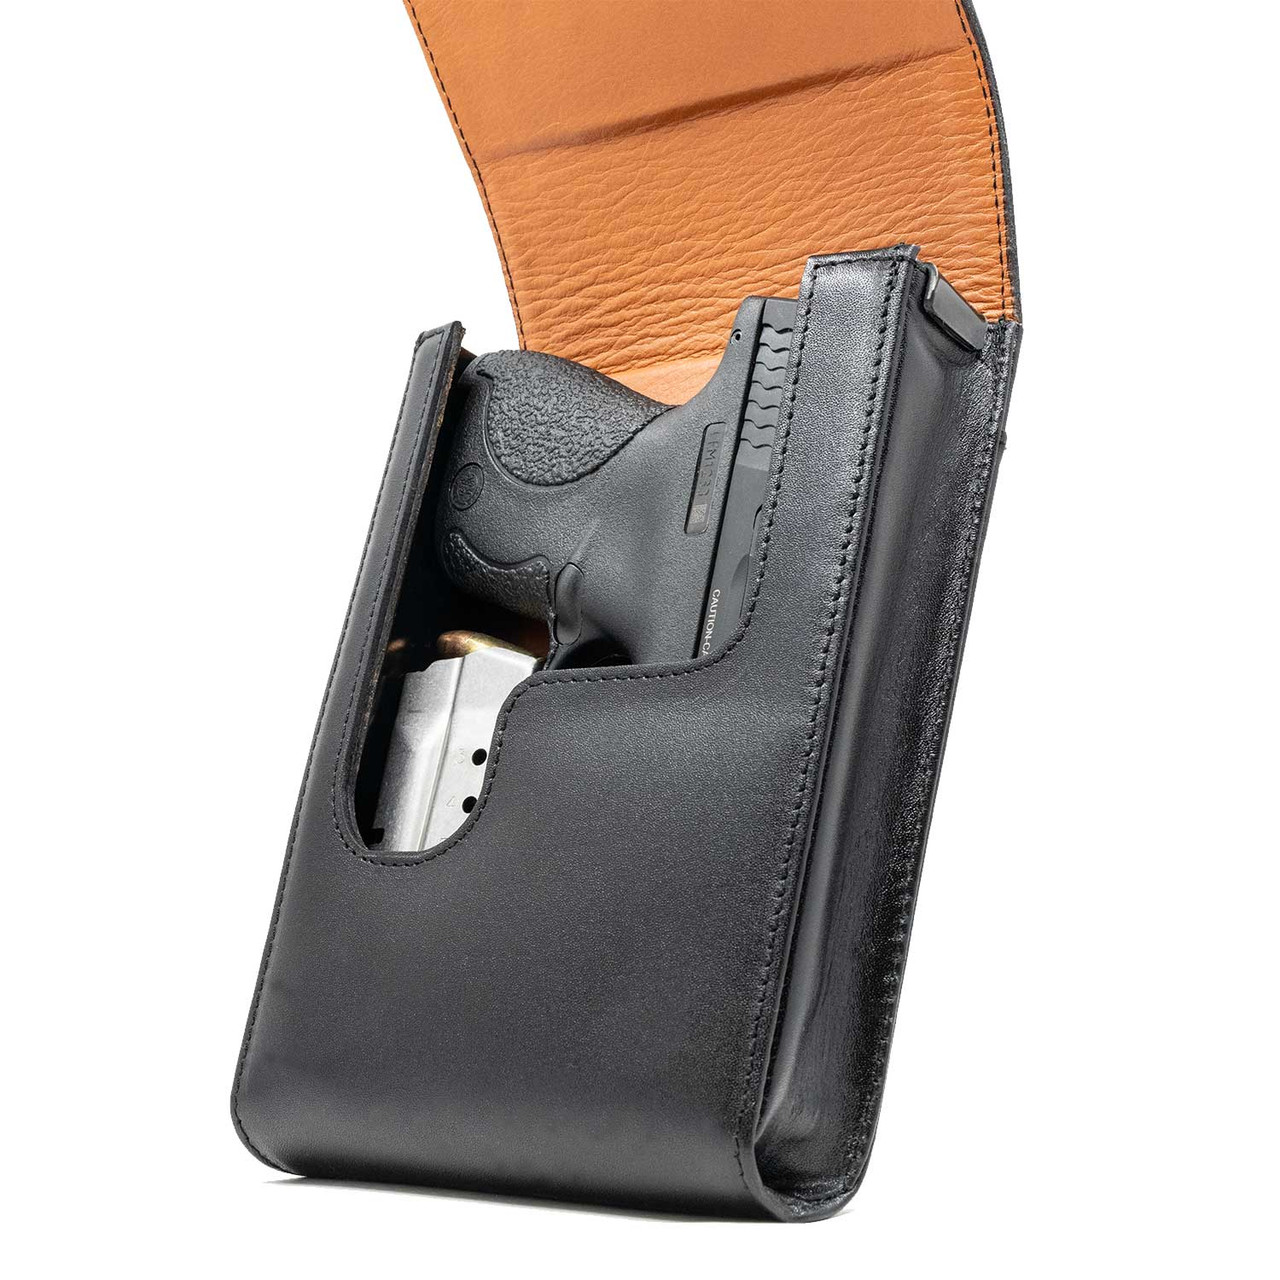 The Glock 30 Xtra Mag Black Leather Holster